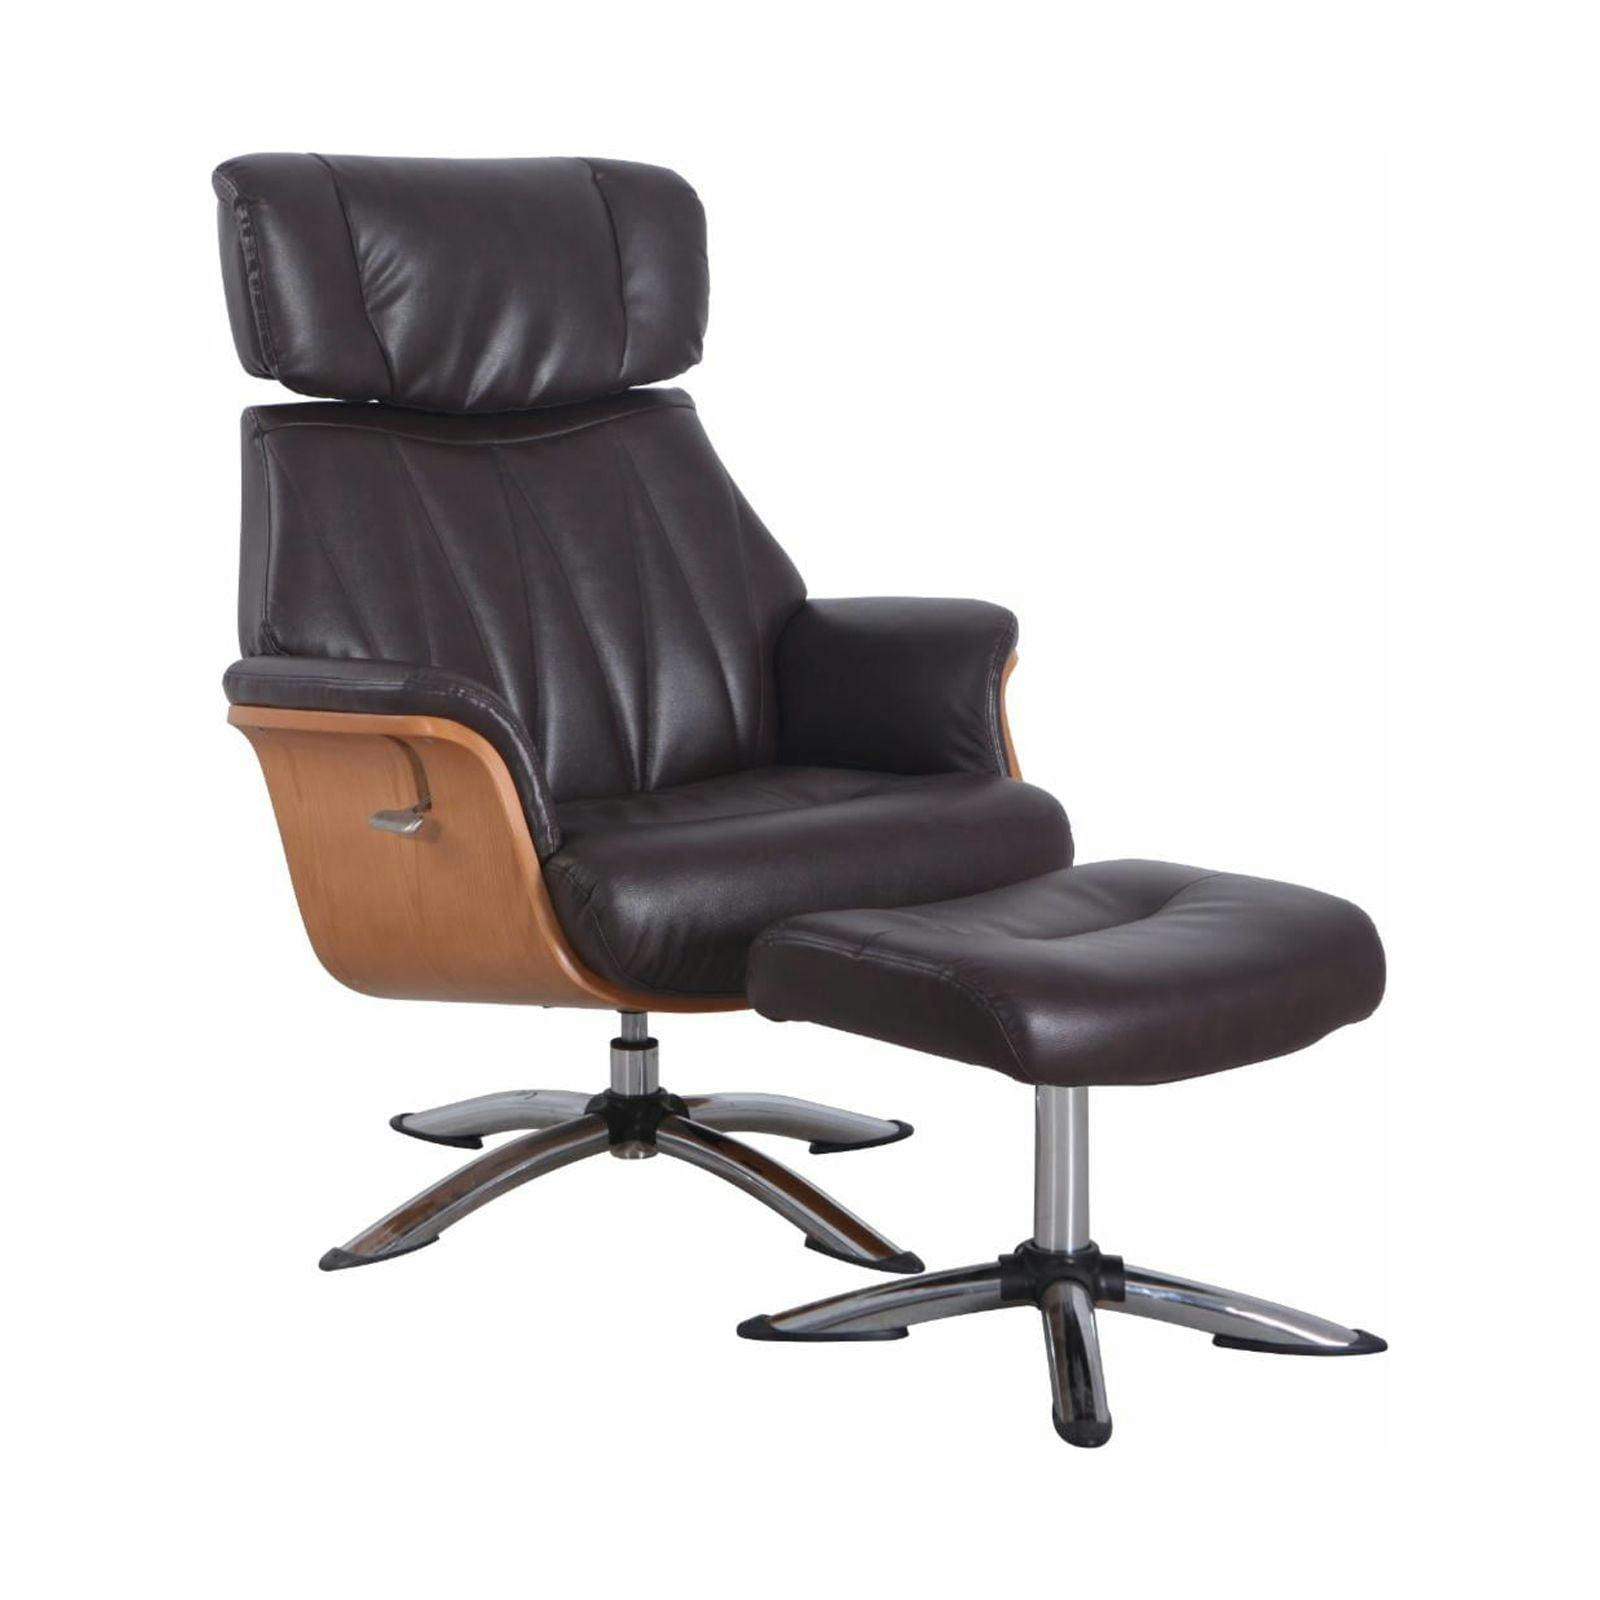 Espresso Leather Swivel Recliner with Wood Accents